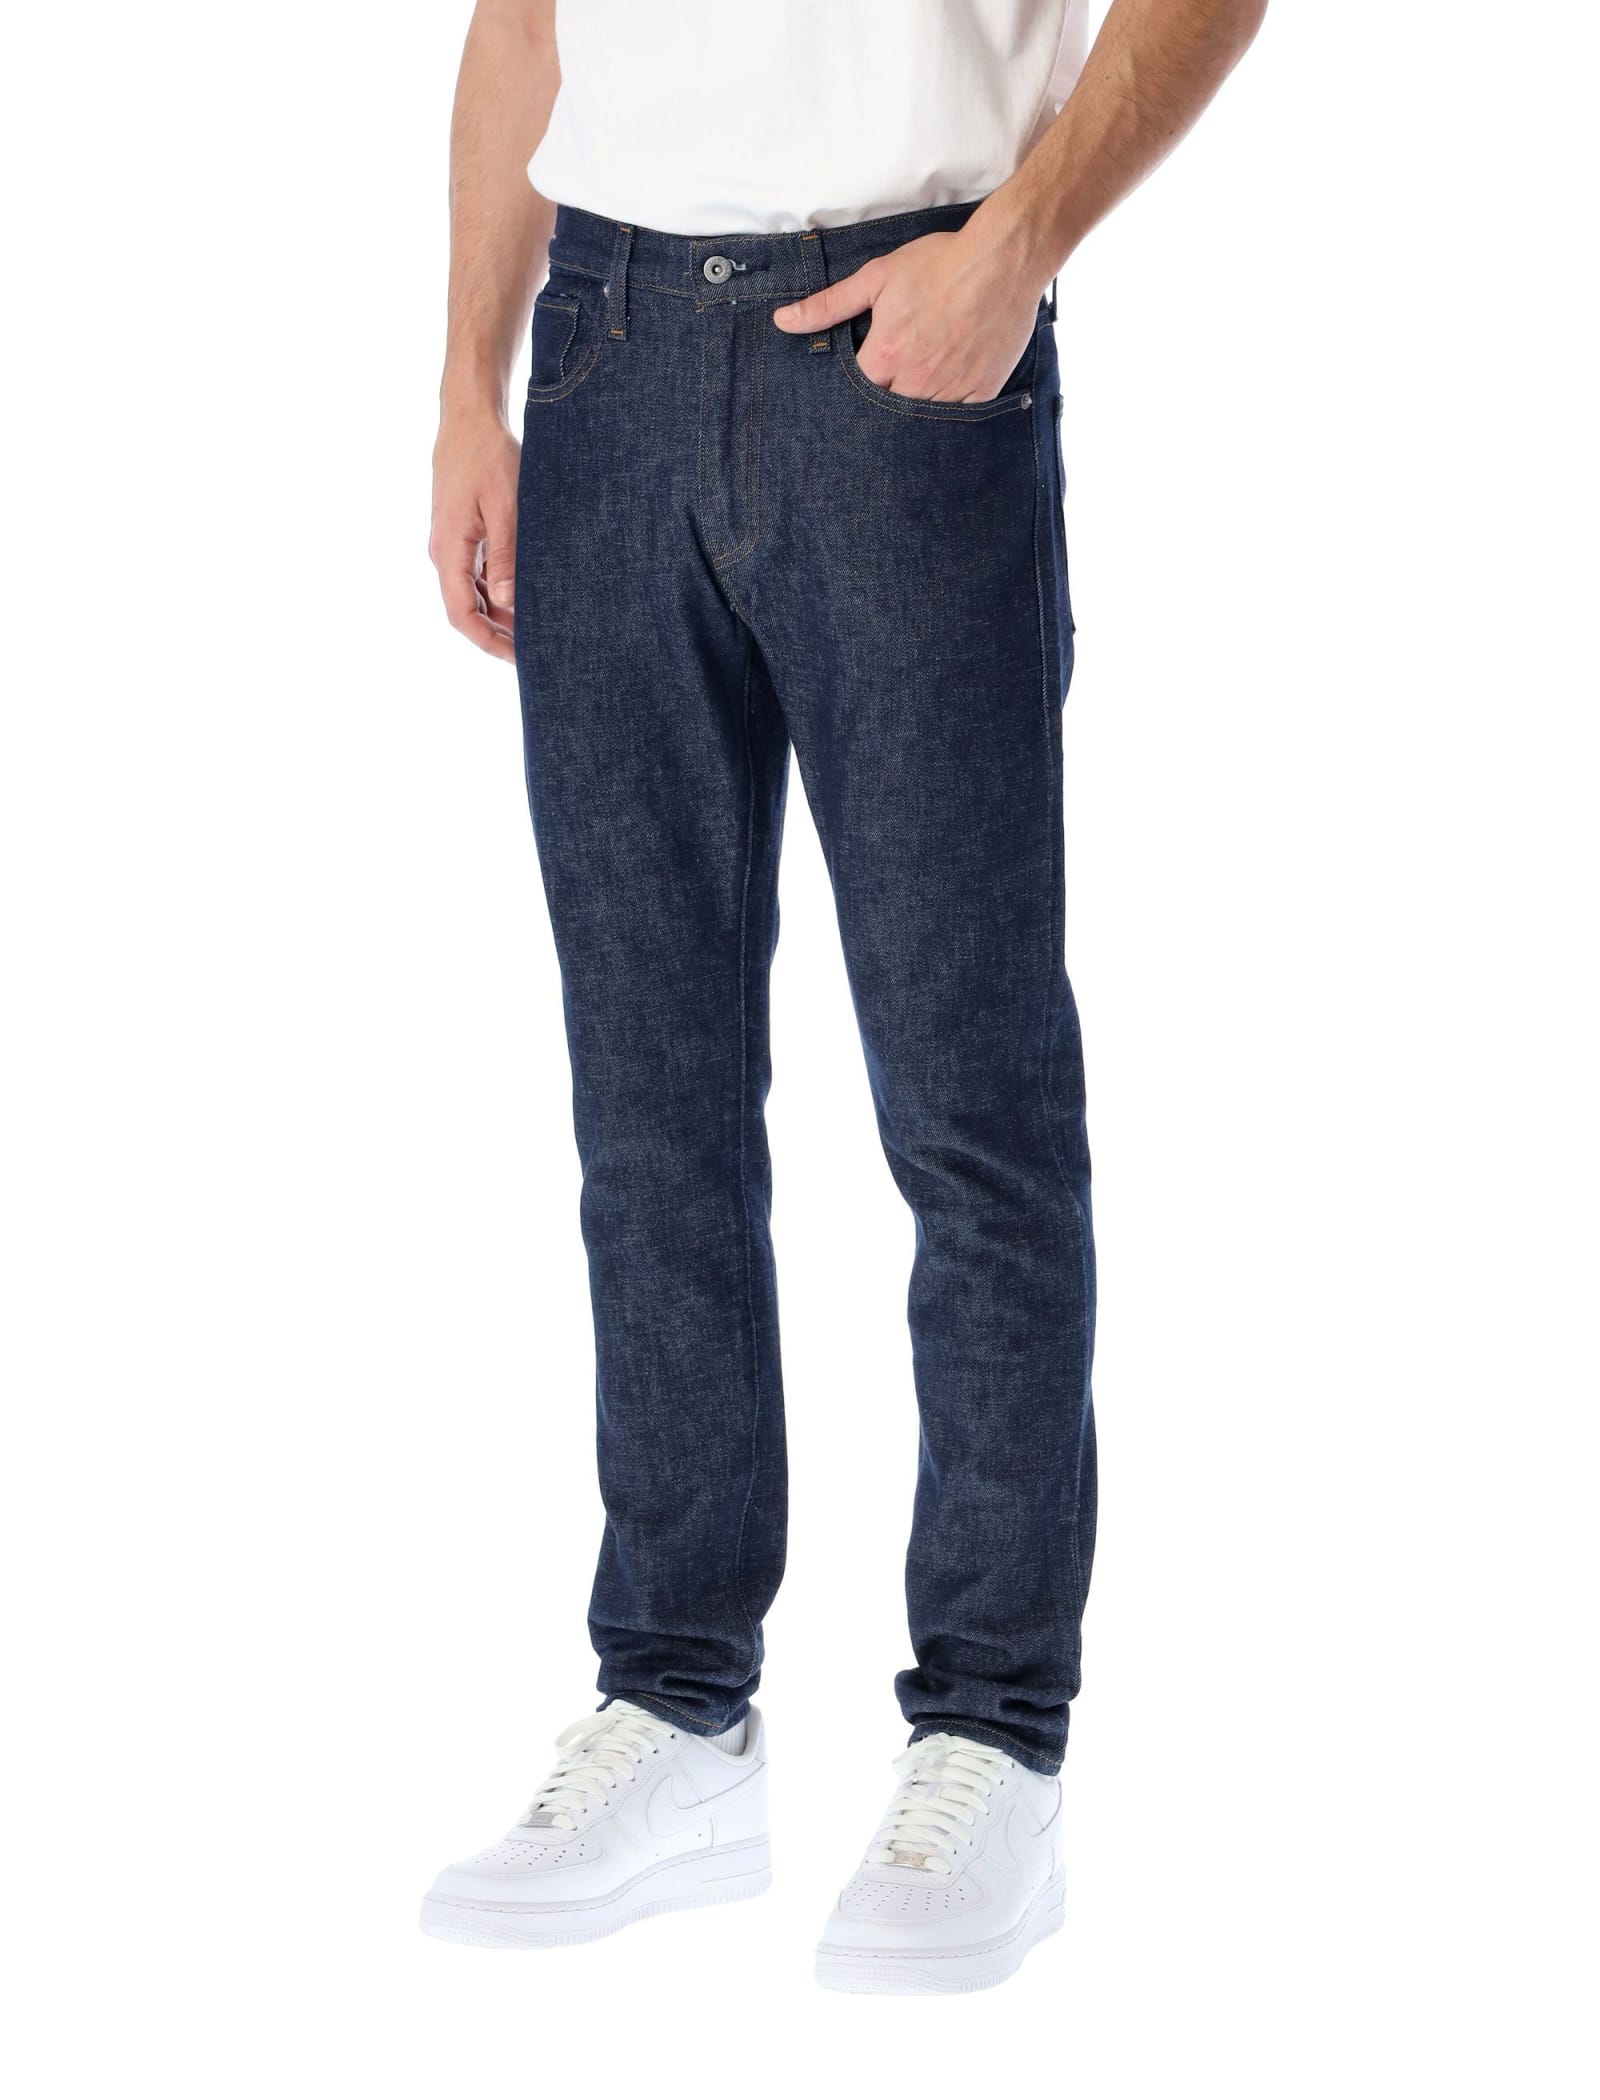 Levis Made & crafted 512 Slim-fit Jeans